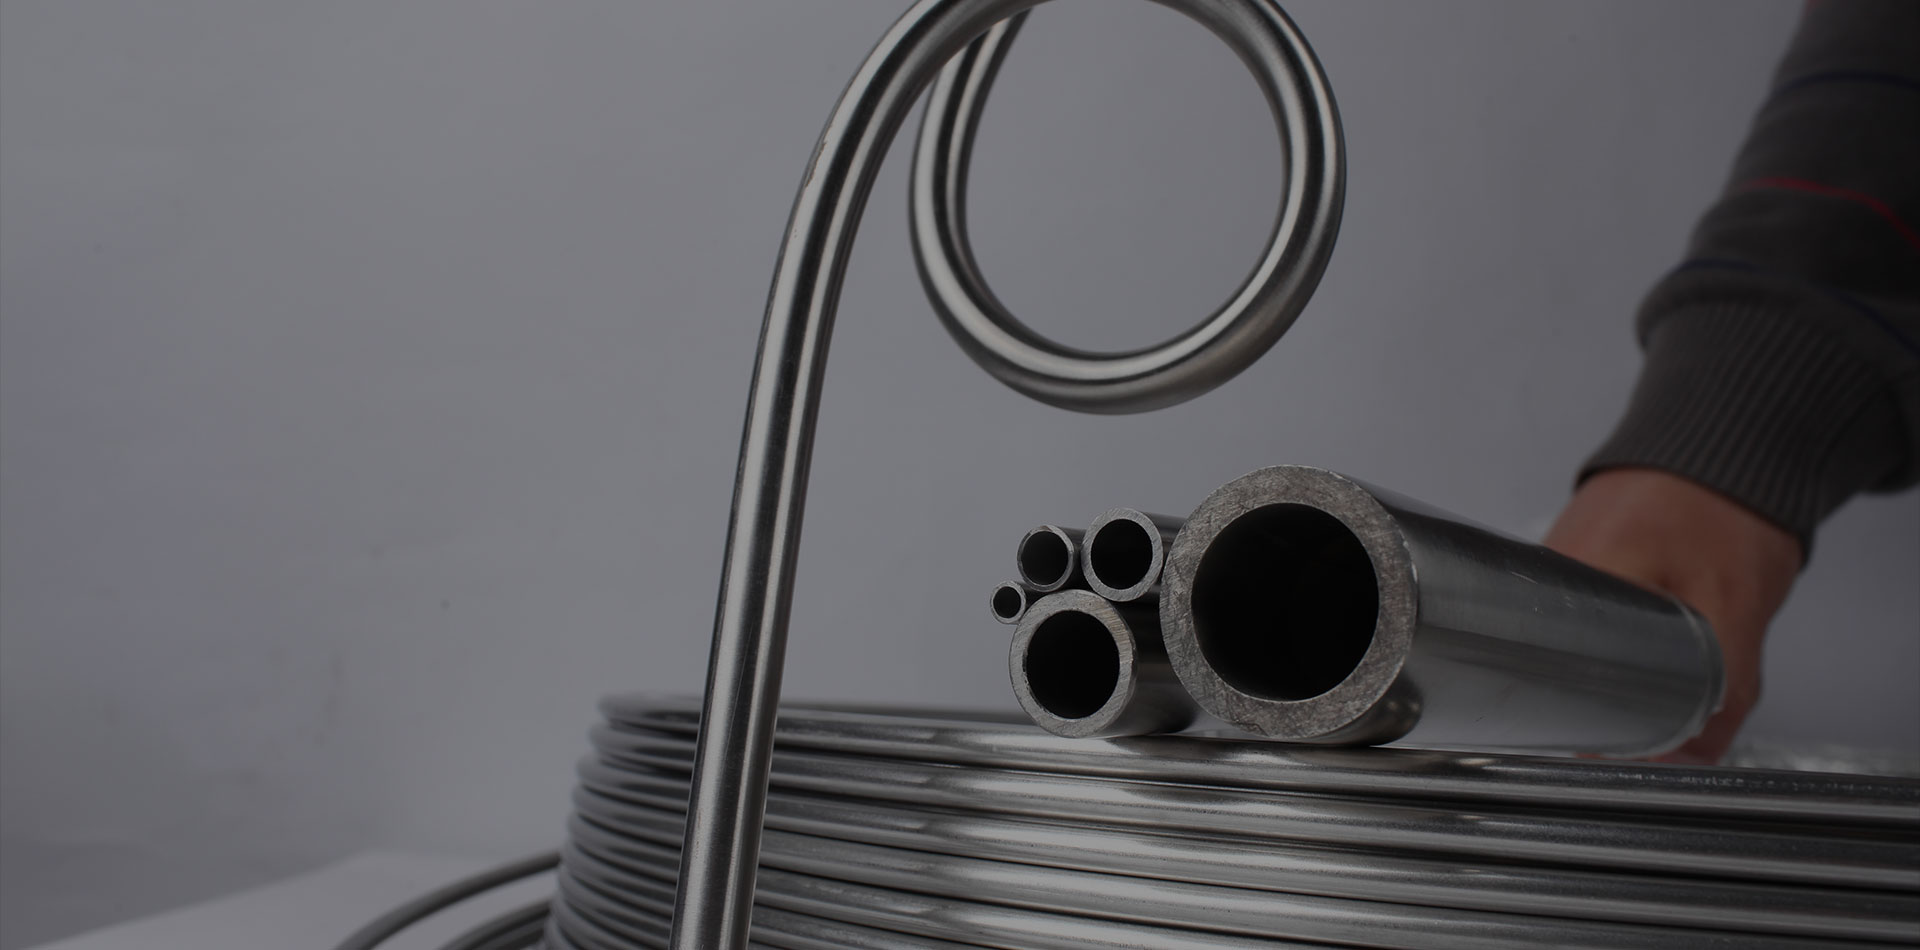 Stainless steel capillary tubing and coil tubing